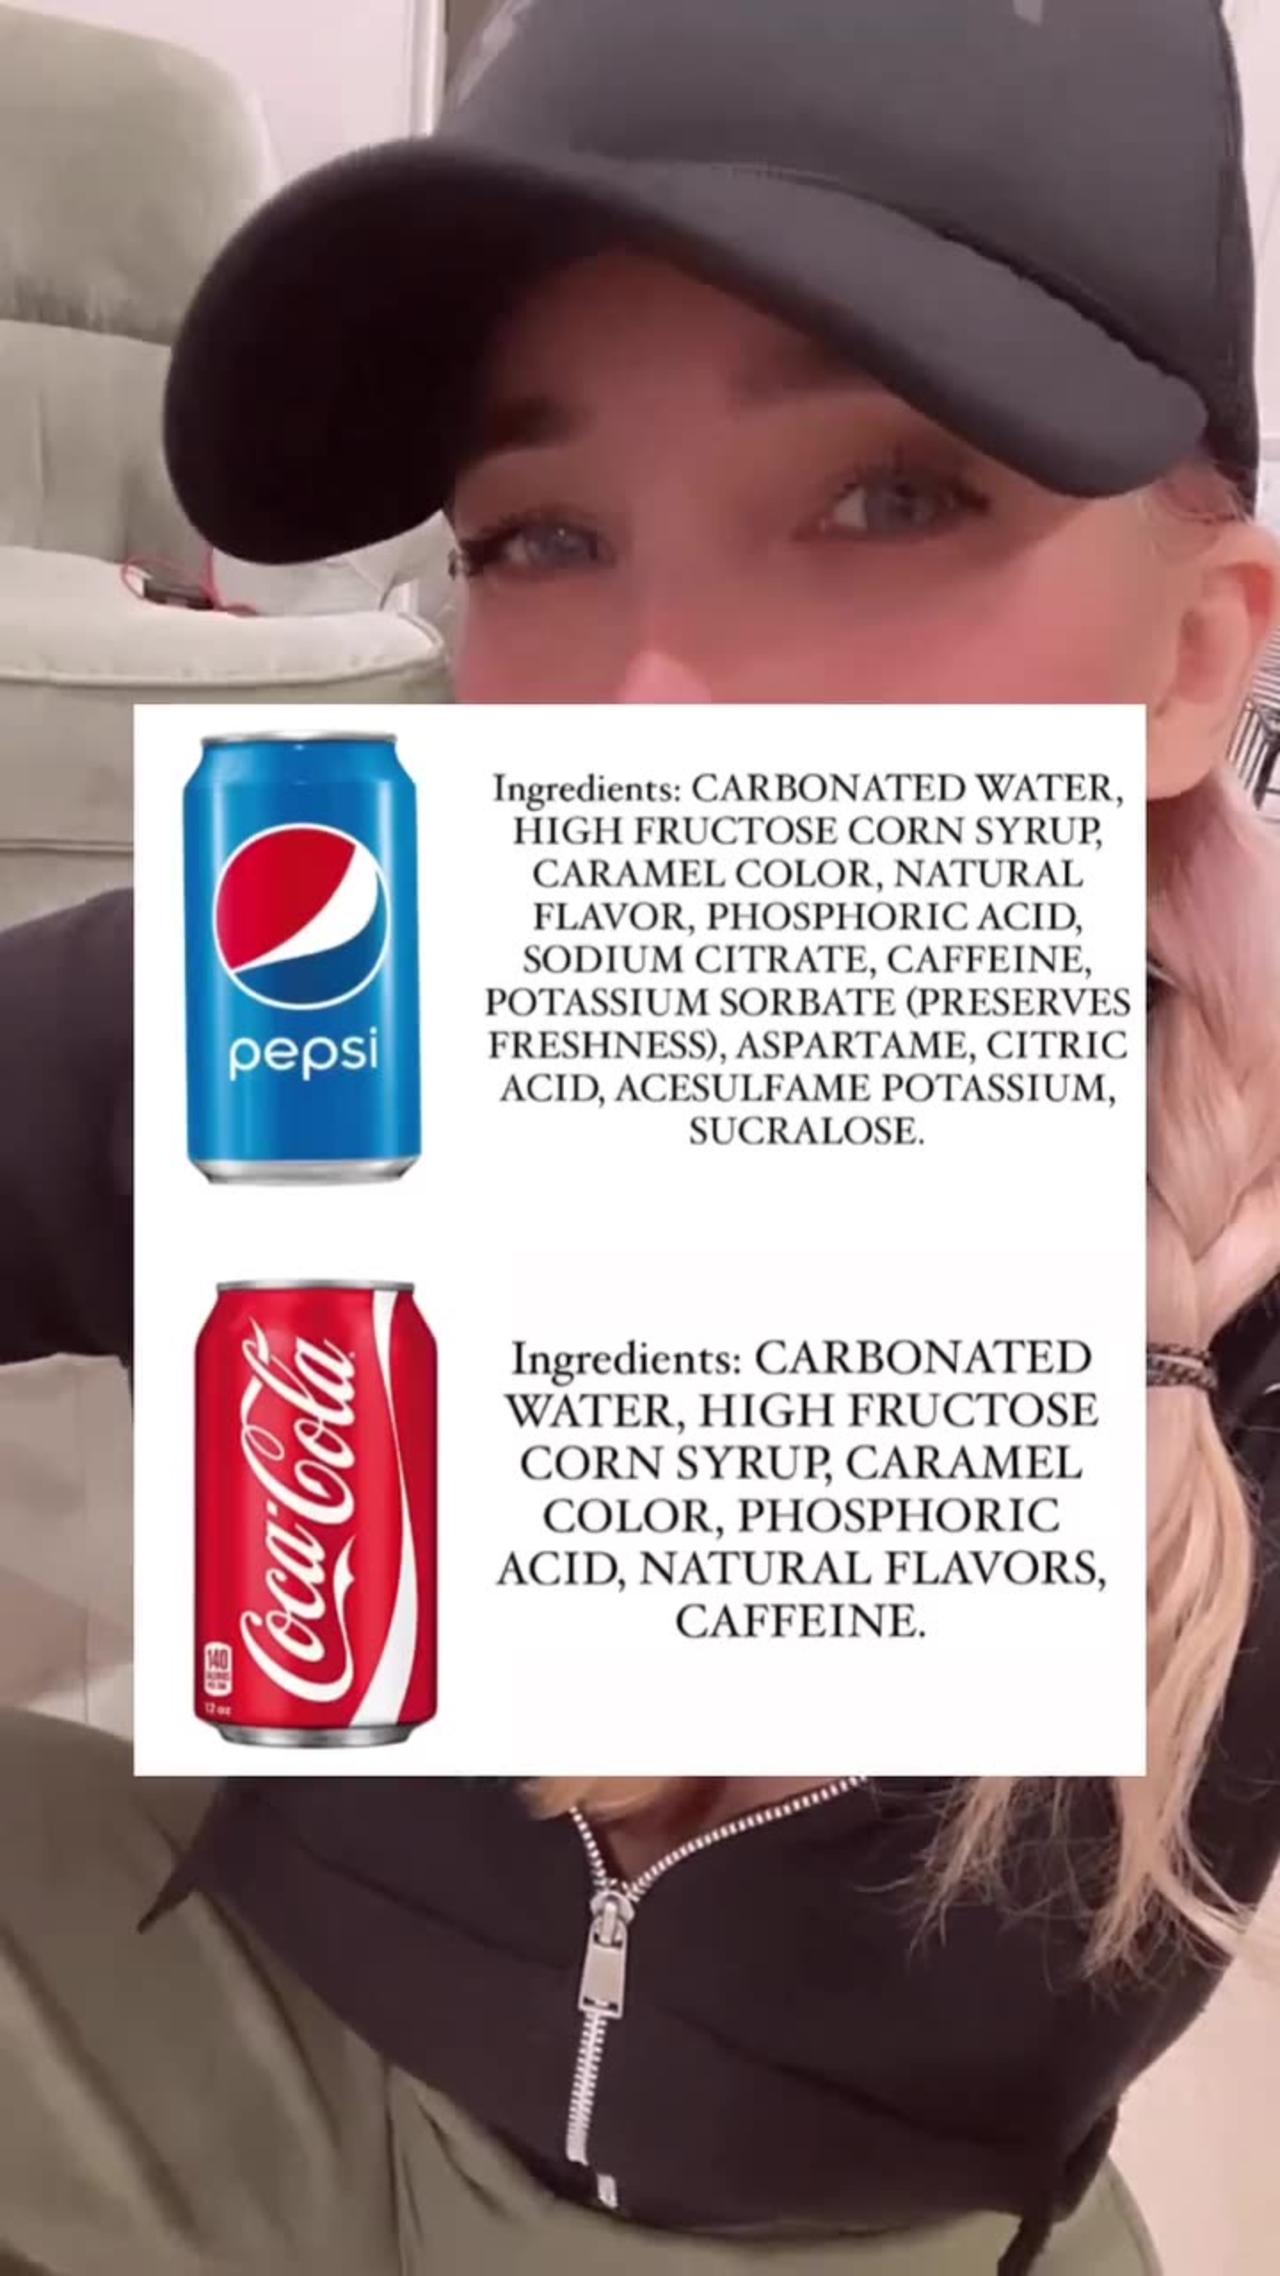 Farming and gardening pesticide is coke or pepsi